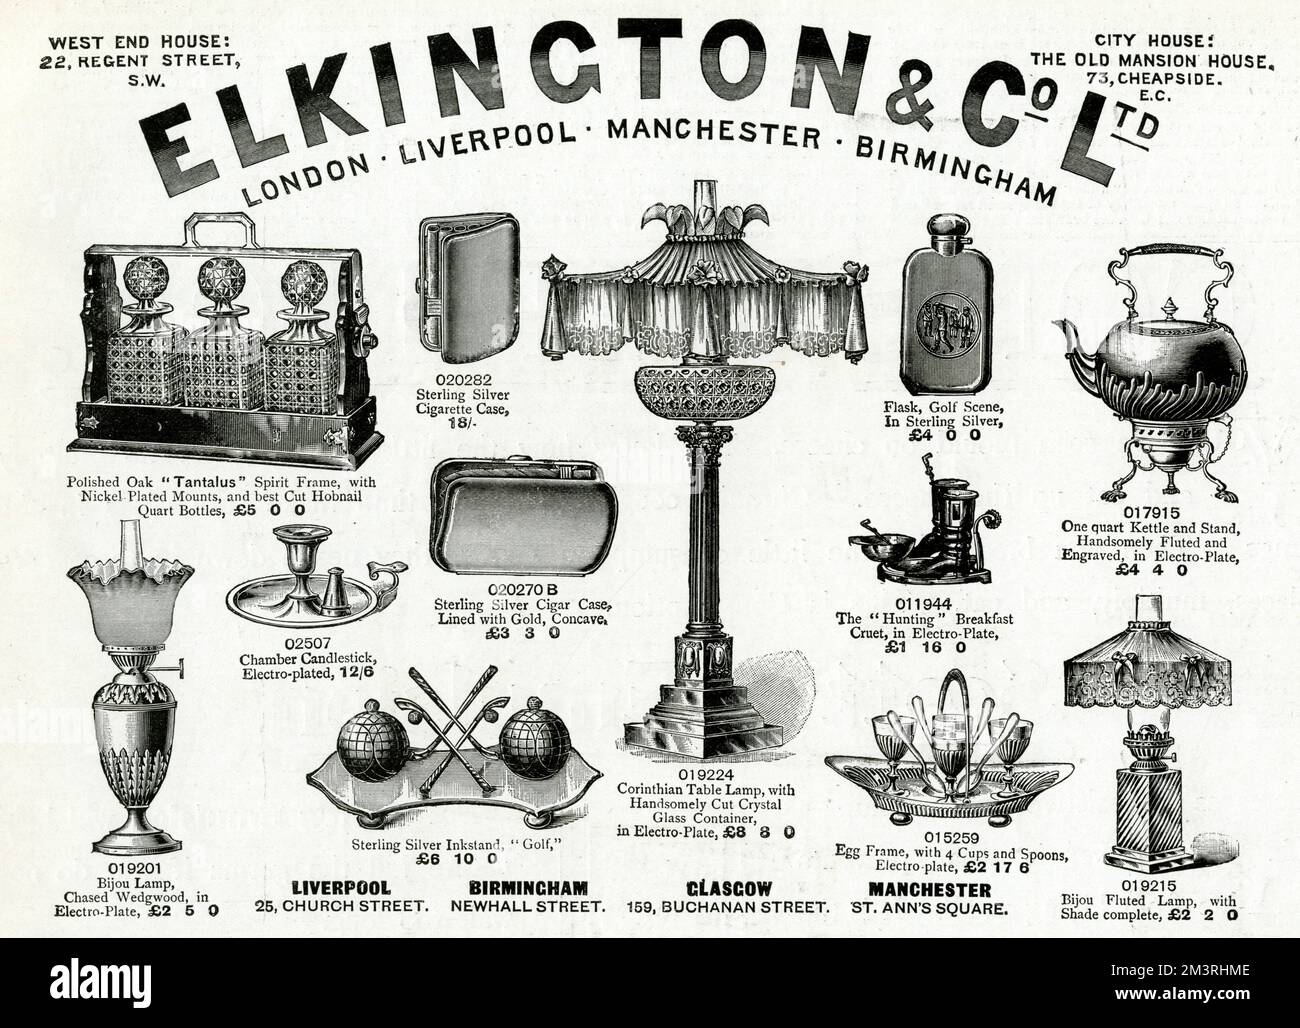 Advert for Elkington &amp; Co, with Victorian household items including polished oak Tantalus with nickel plated mounts, and best cut Hobnail Quart bottles, corinthian table lamp, with cut crystal glass container, egg frame, with 4 cups and spoons.  1896 Stock Photo